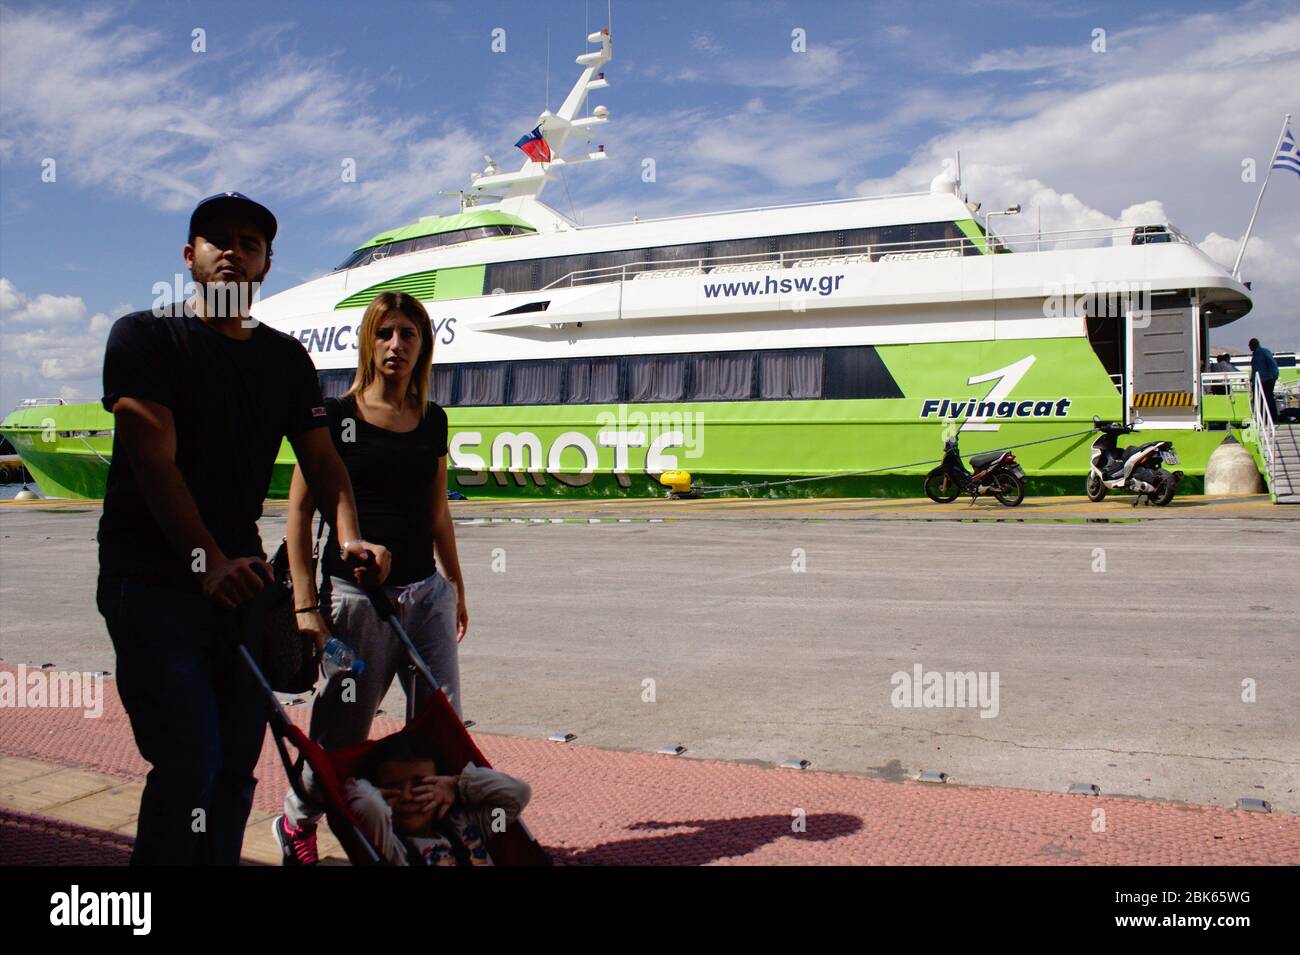 Scenic at the port of Piraeus, Greece, with a flying cat in the background, September 23 2015. Stock Photo